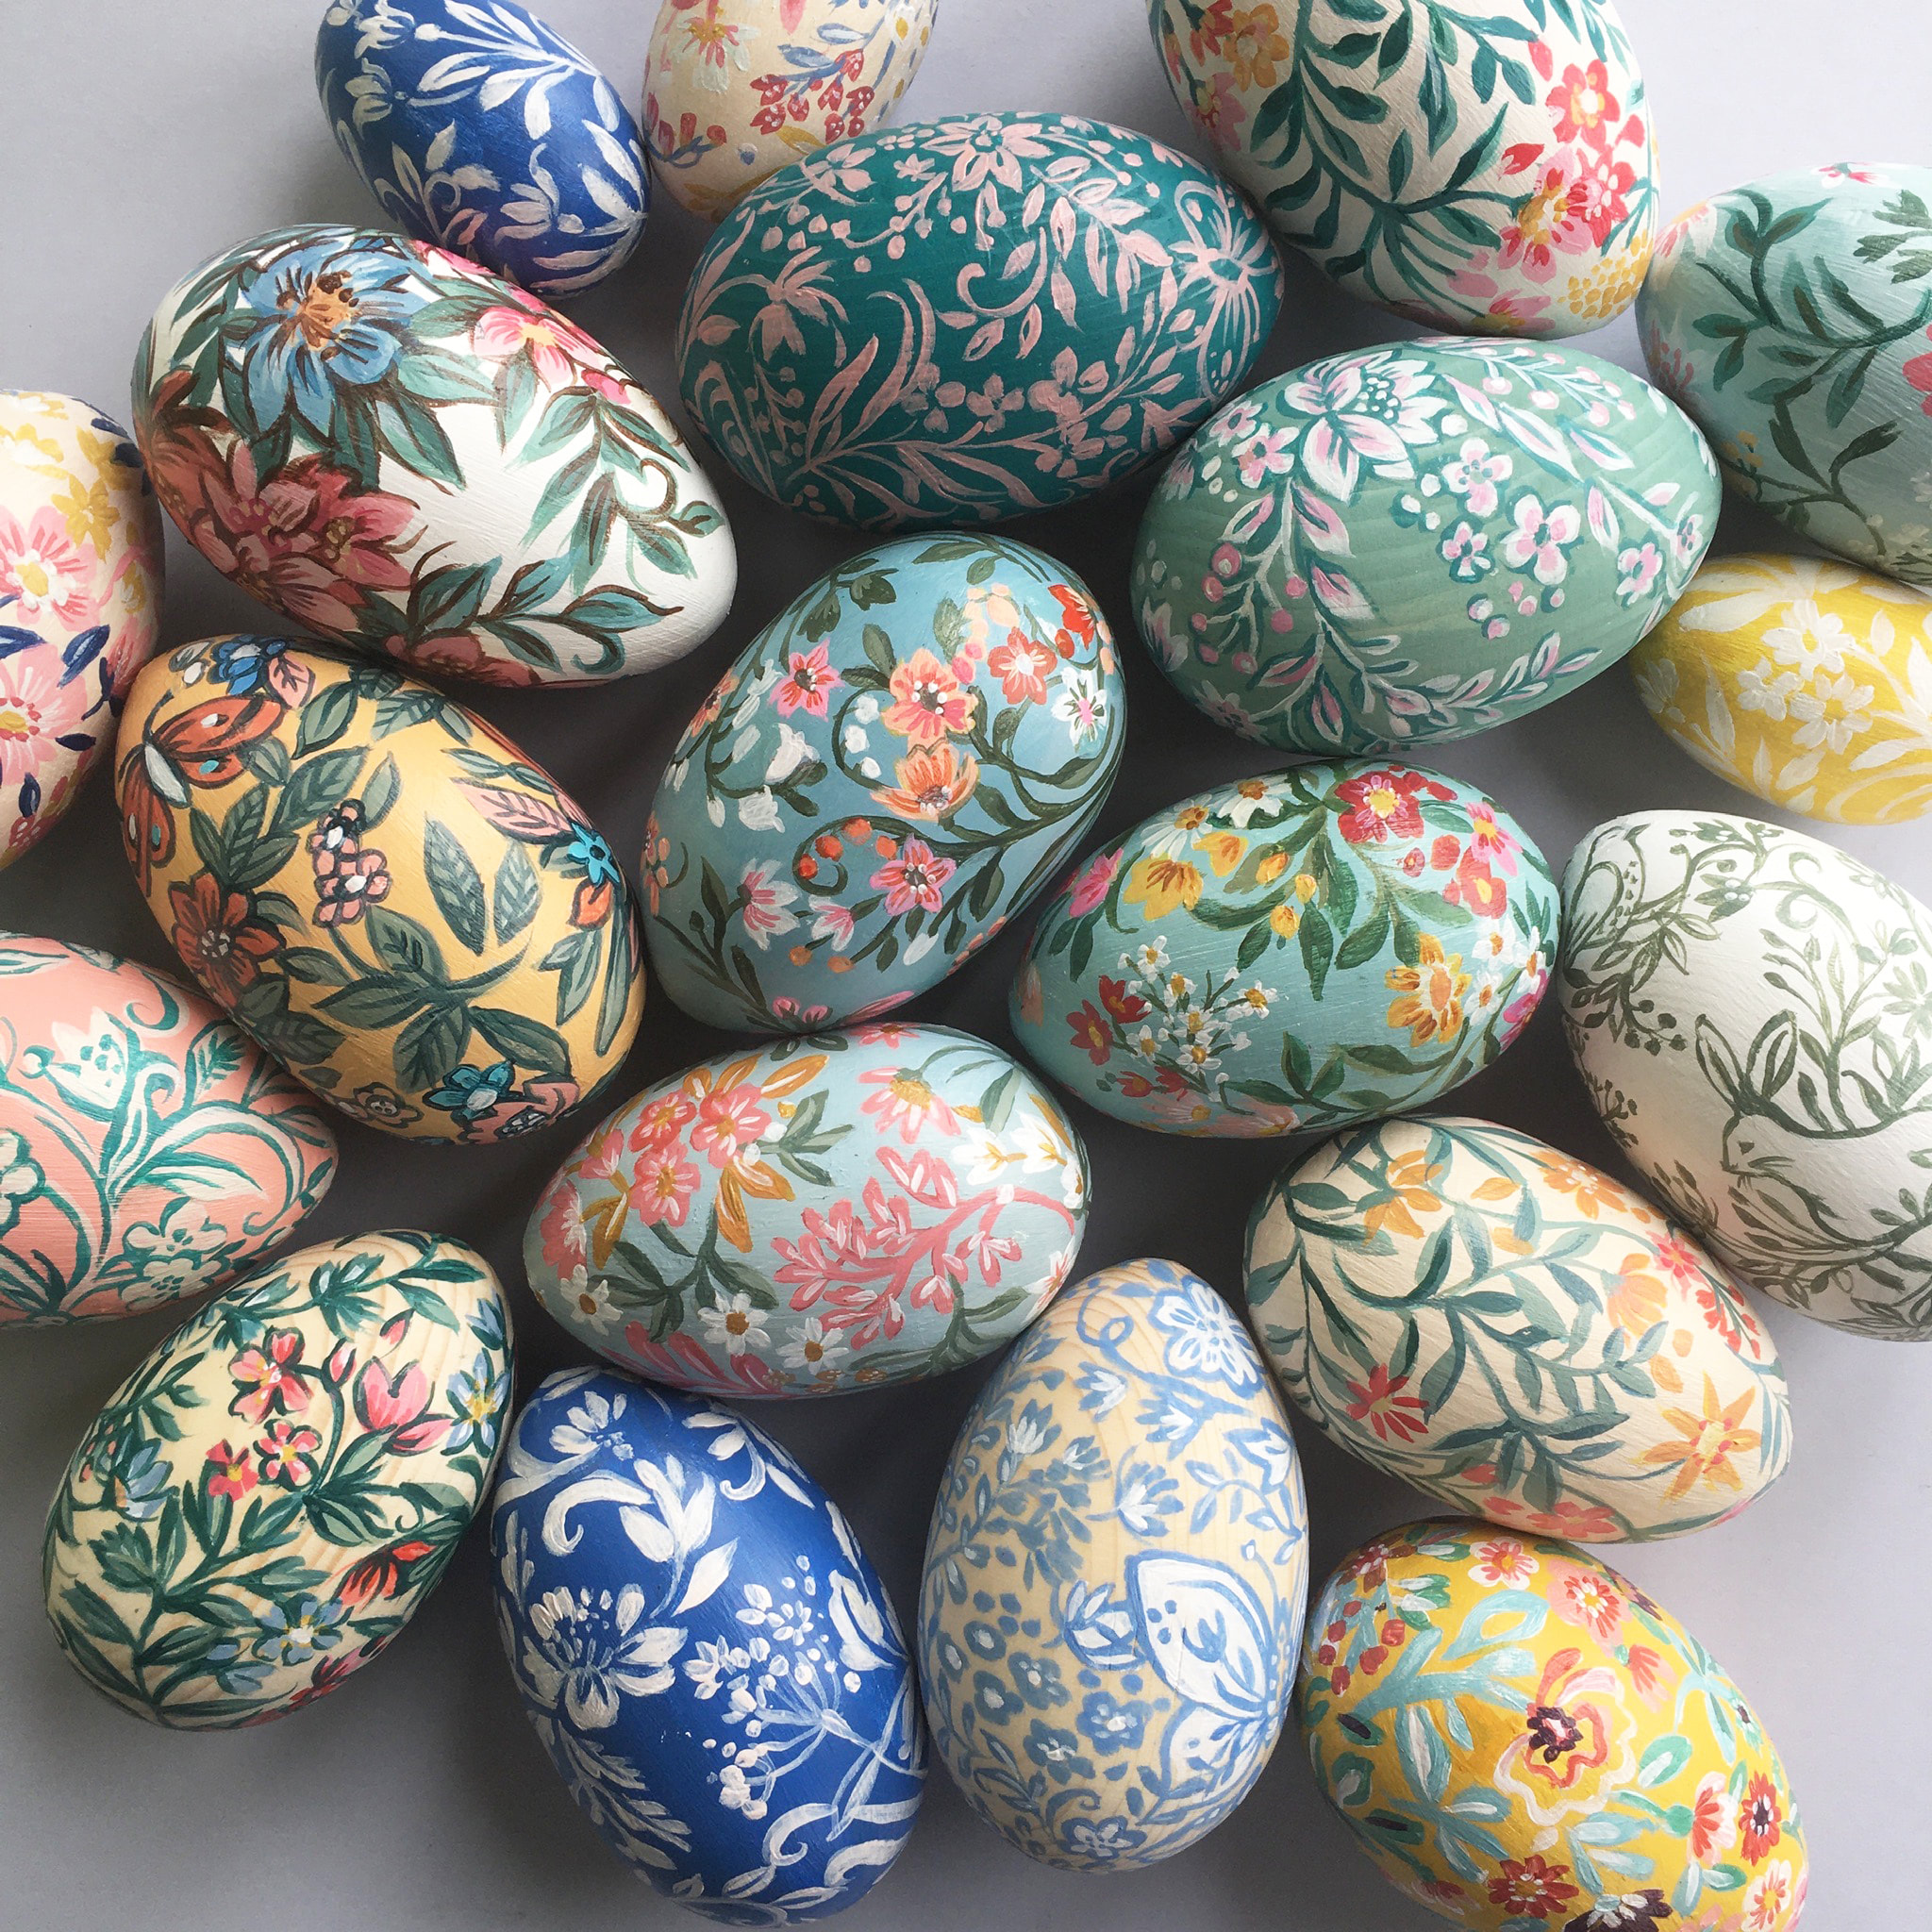 Hand Painted Wooden Eggs for Easter 